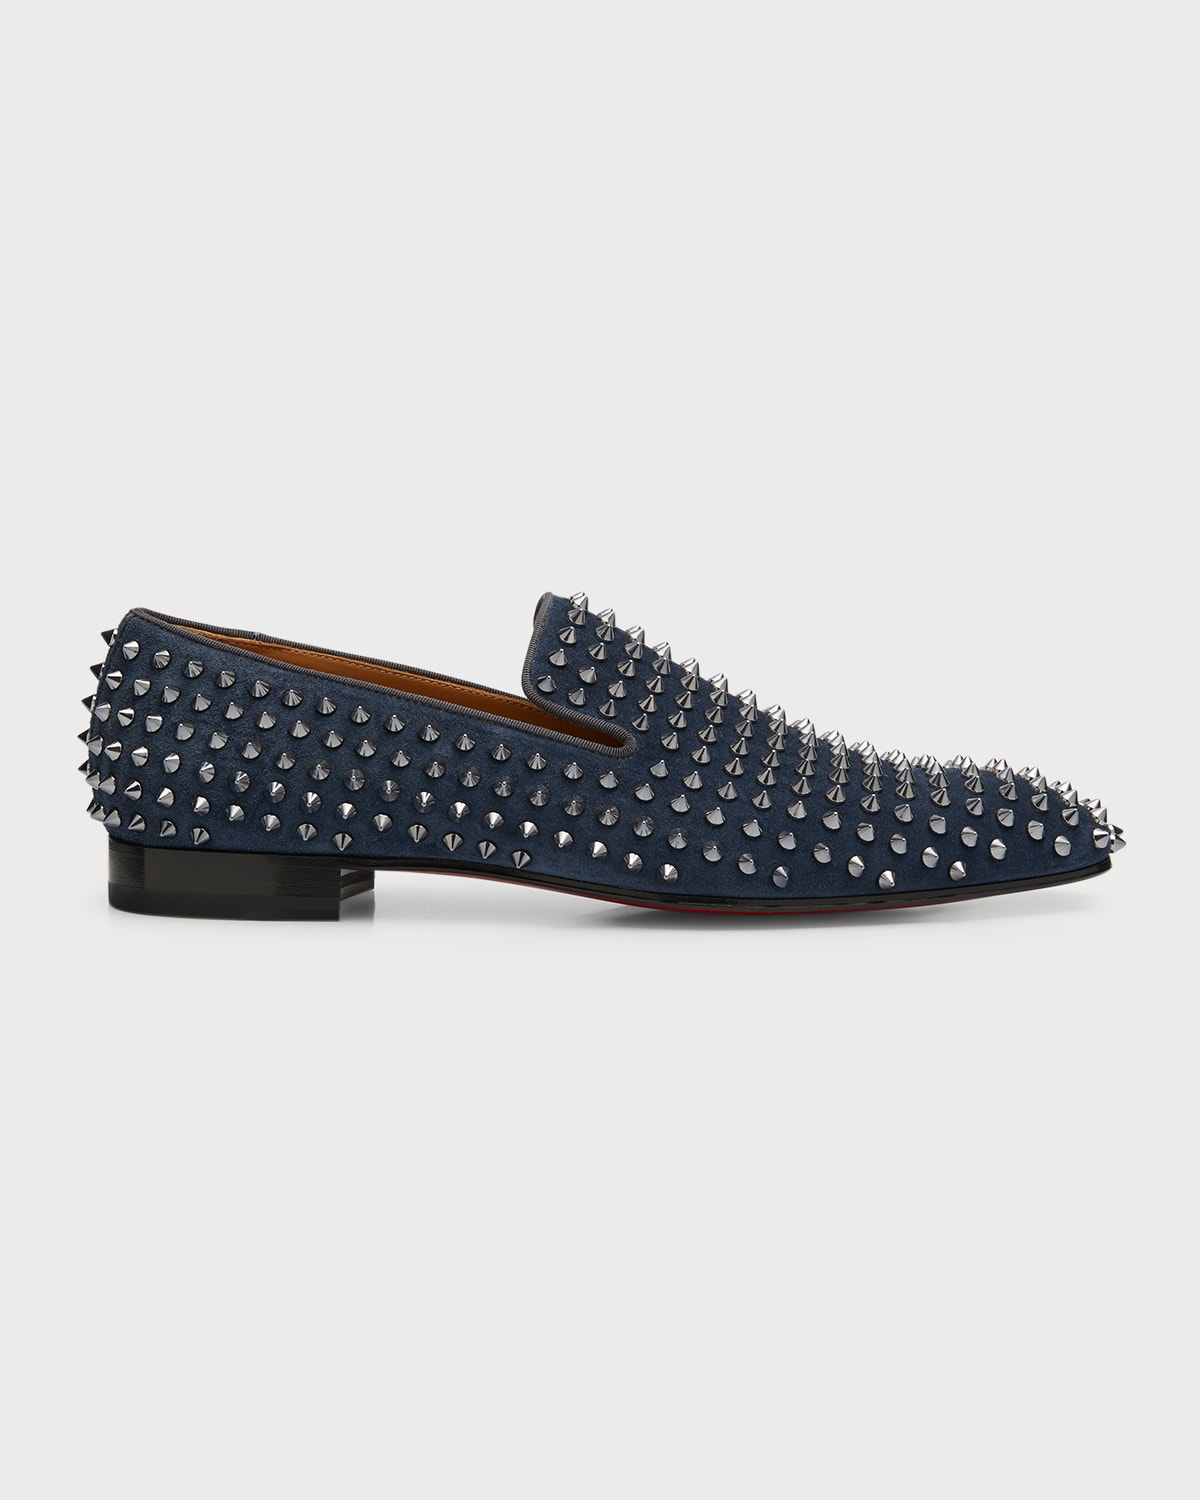 CHRISTIAN LOUBOUTIN MEN'S DANDELION SPIKES LEATHER LOAFERS